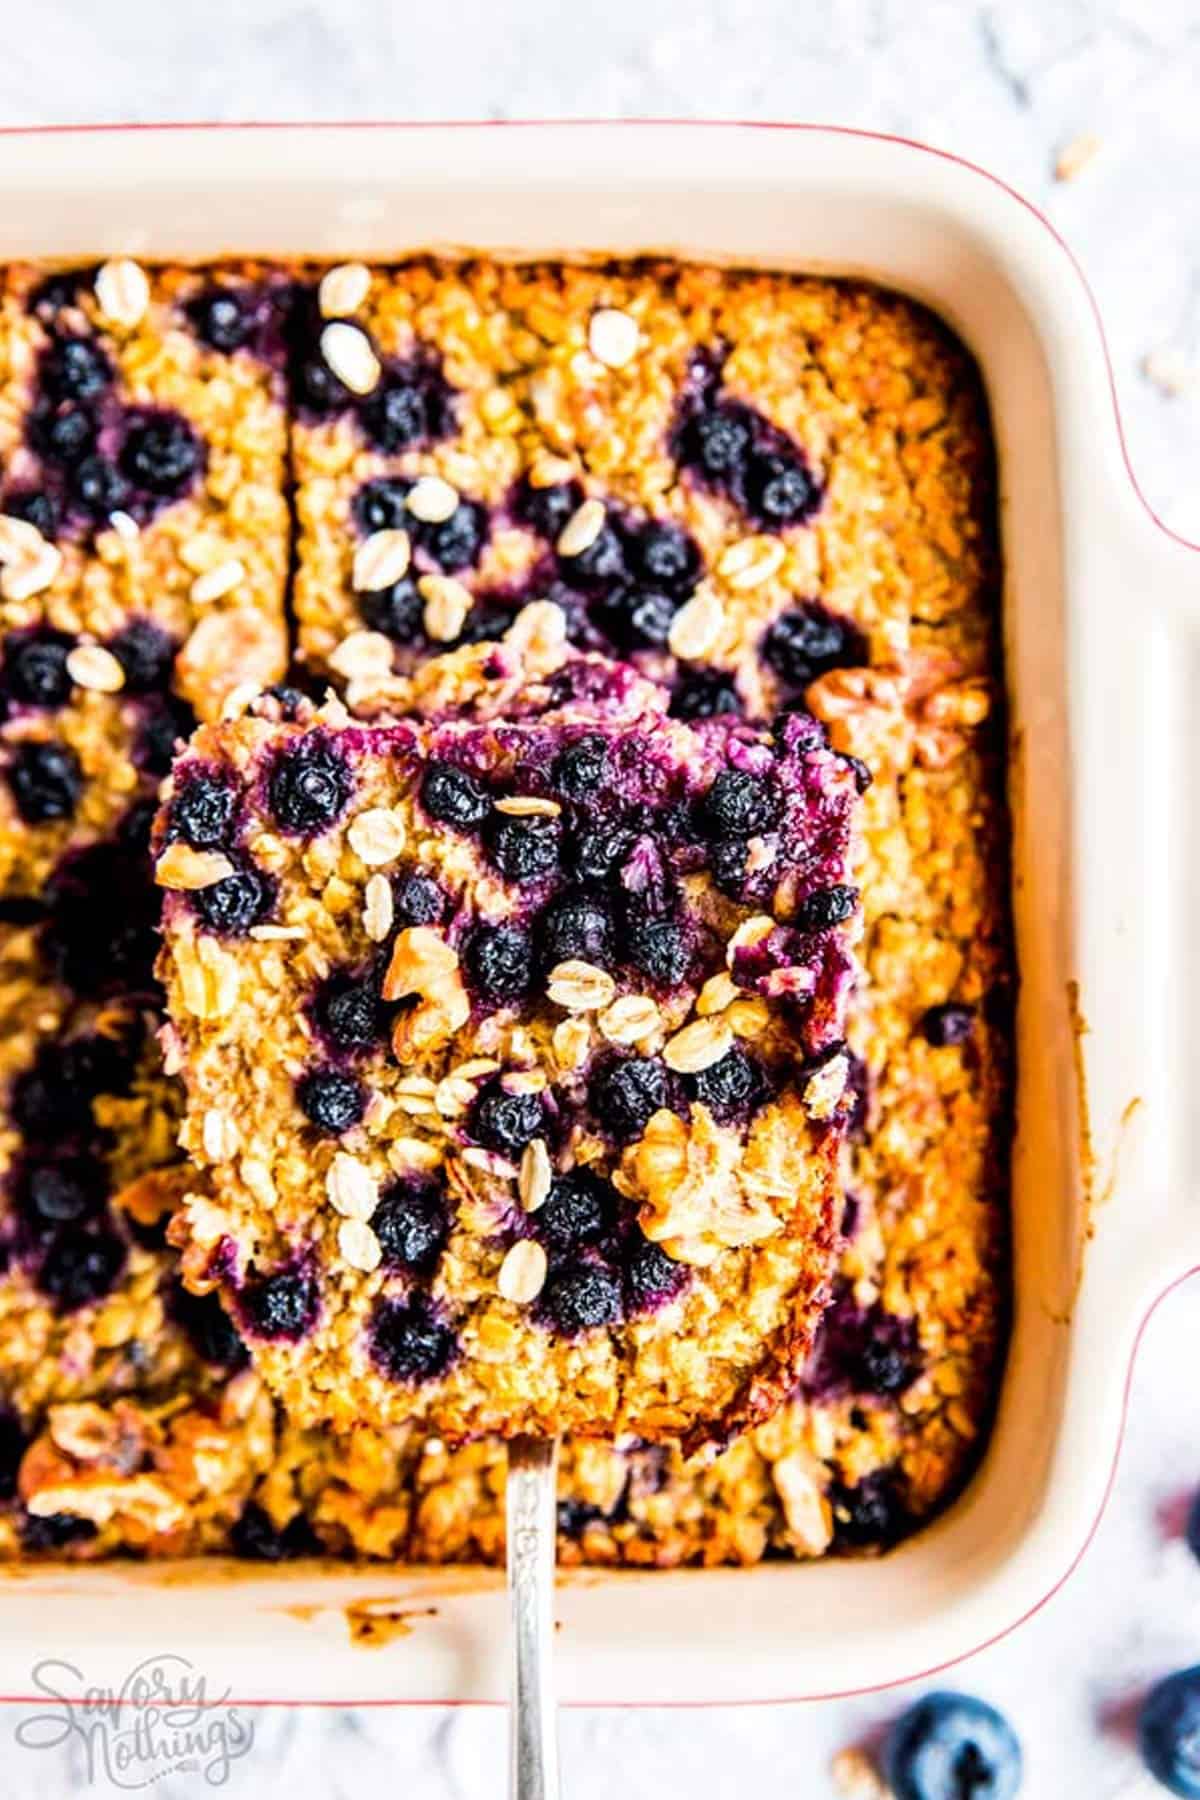 Easy and Healthy Blueberry Baked Oatmeal Recipe - Blueberry Recipes